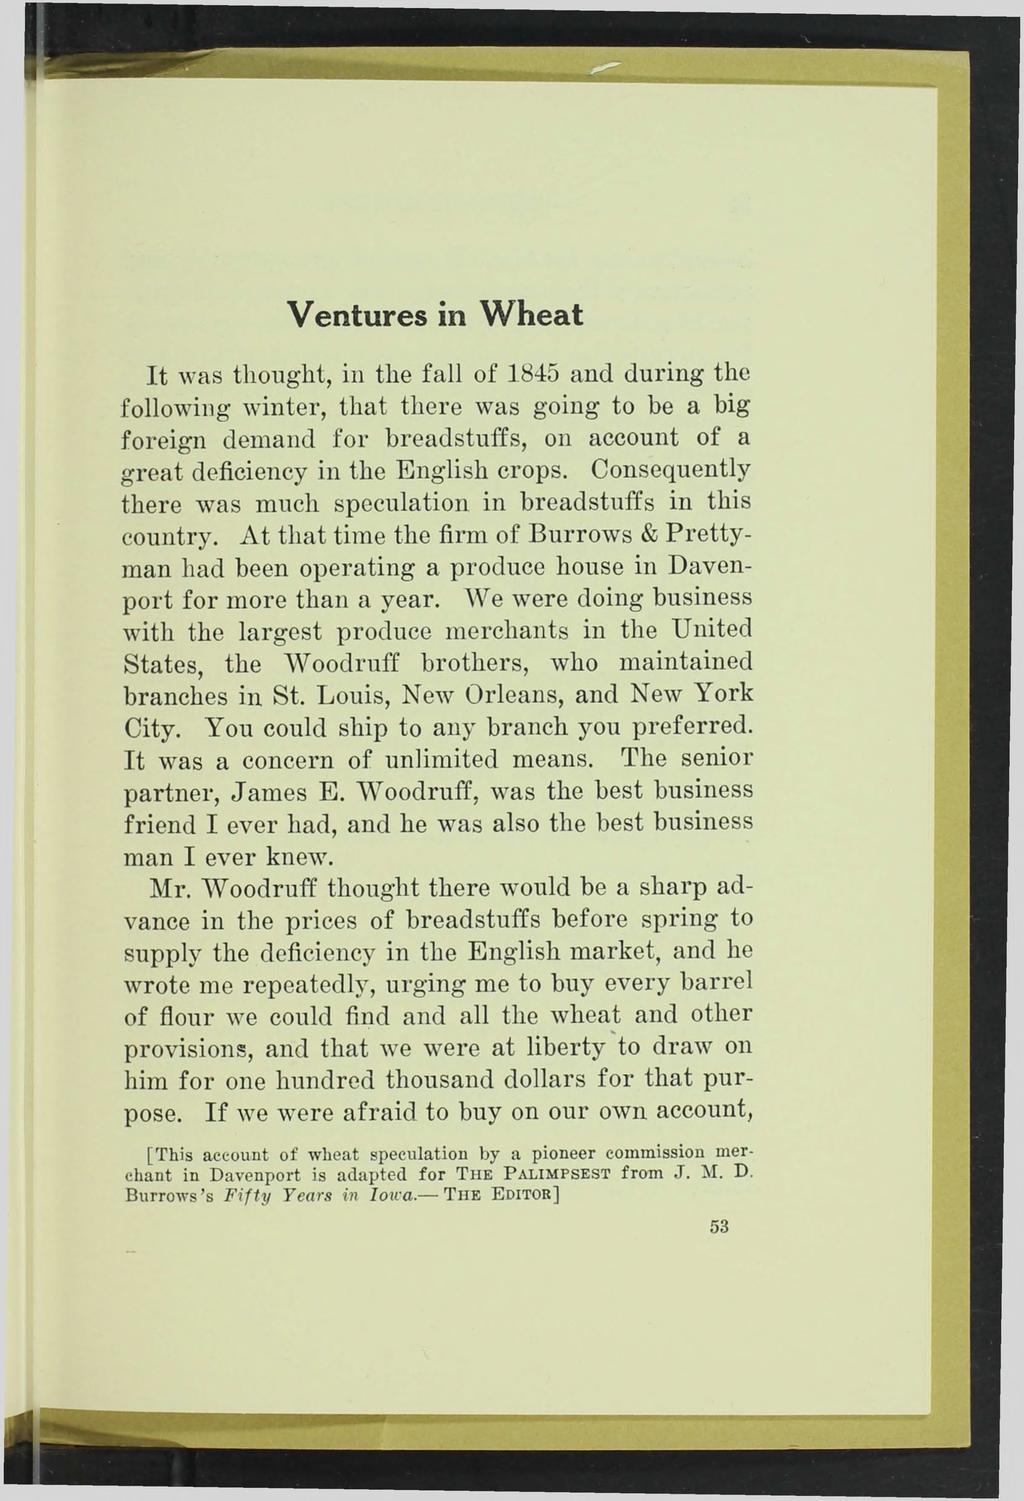 Ventures in Wheat It was thought, in the fall of 1845 and during the following winter, that there was going to be a big foreign demand for breadstuffs, on account of a great deficiency in the English